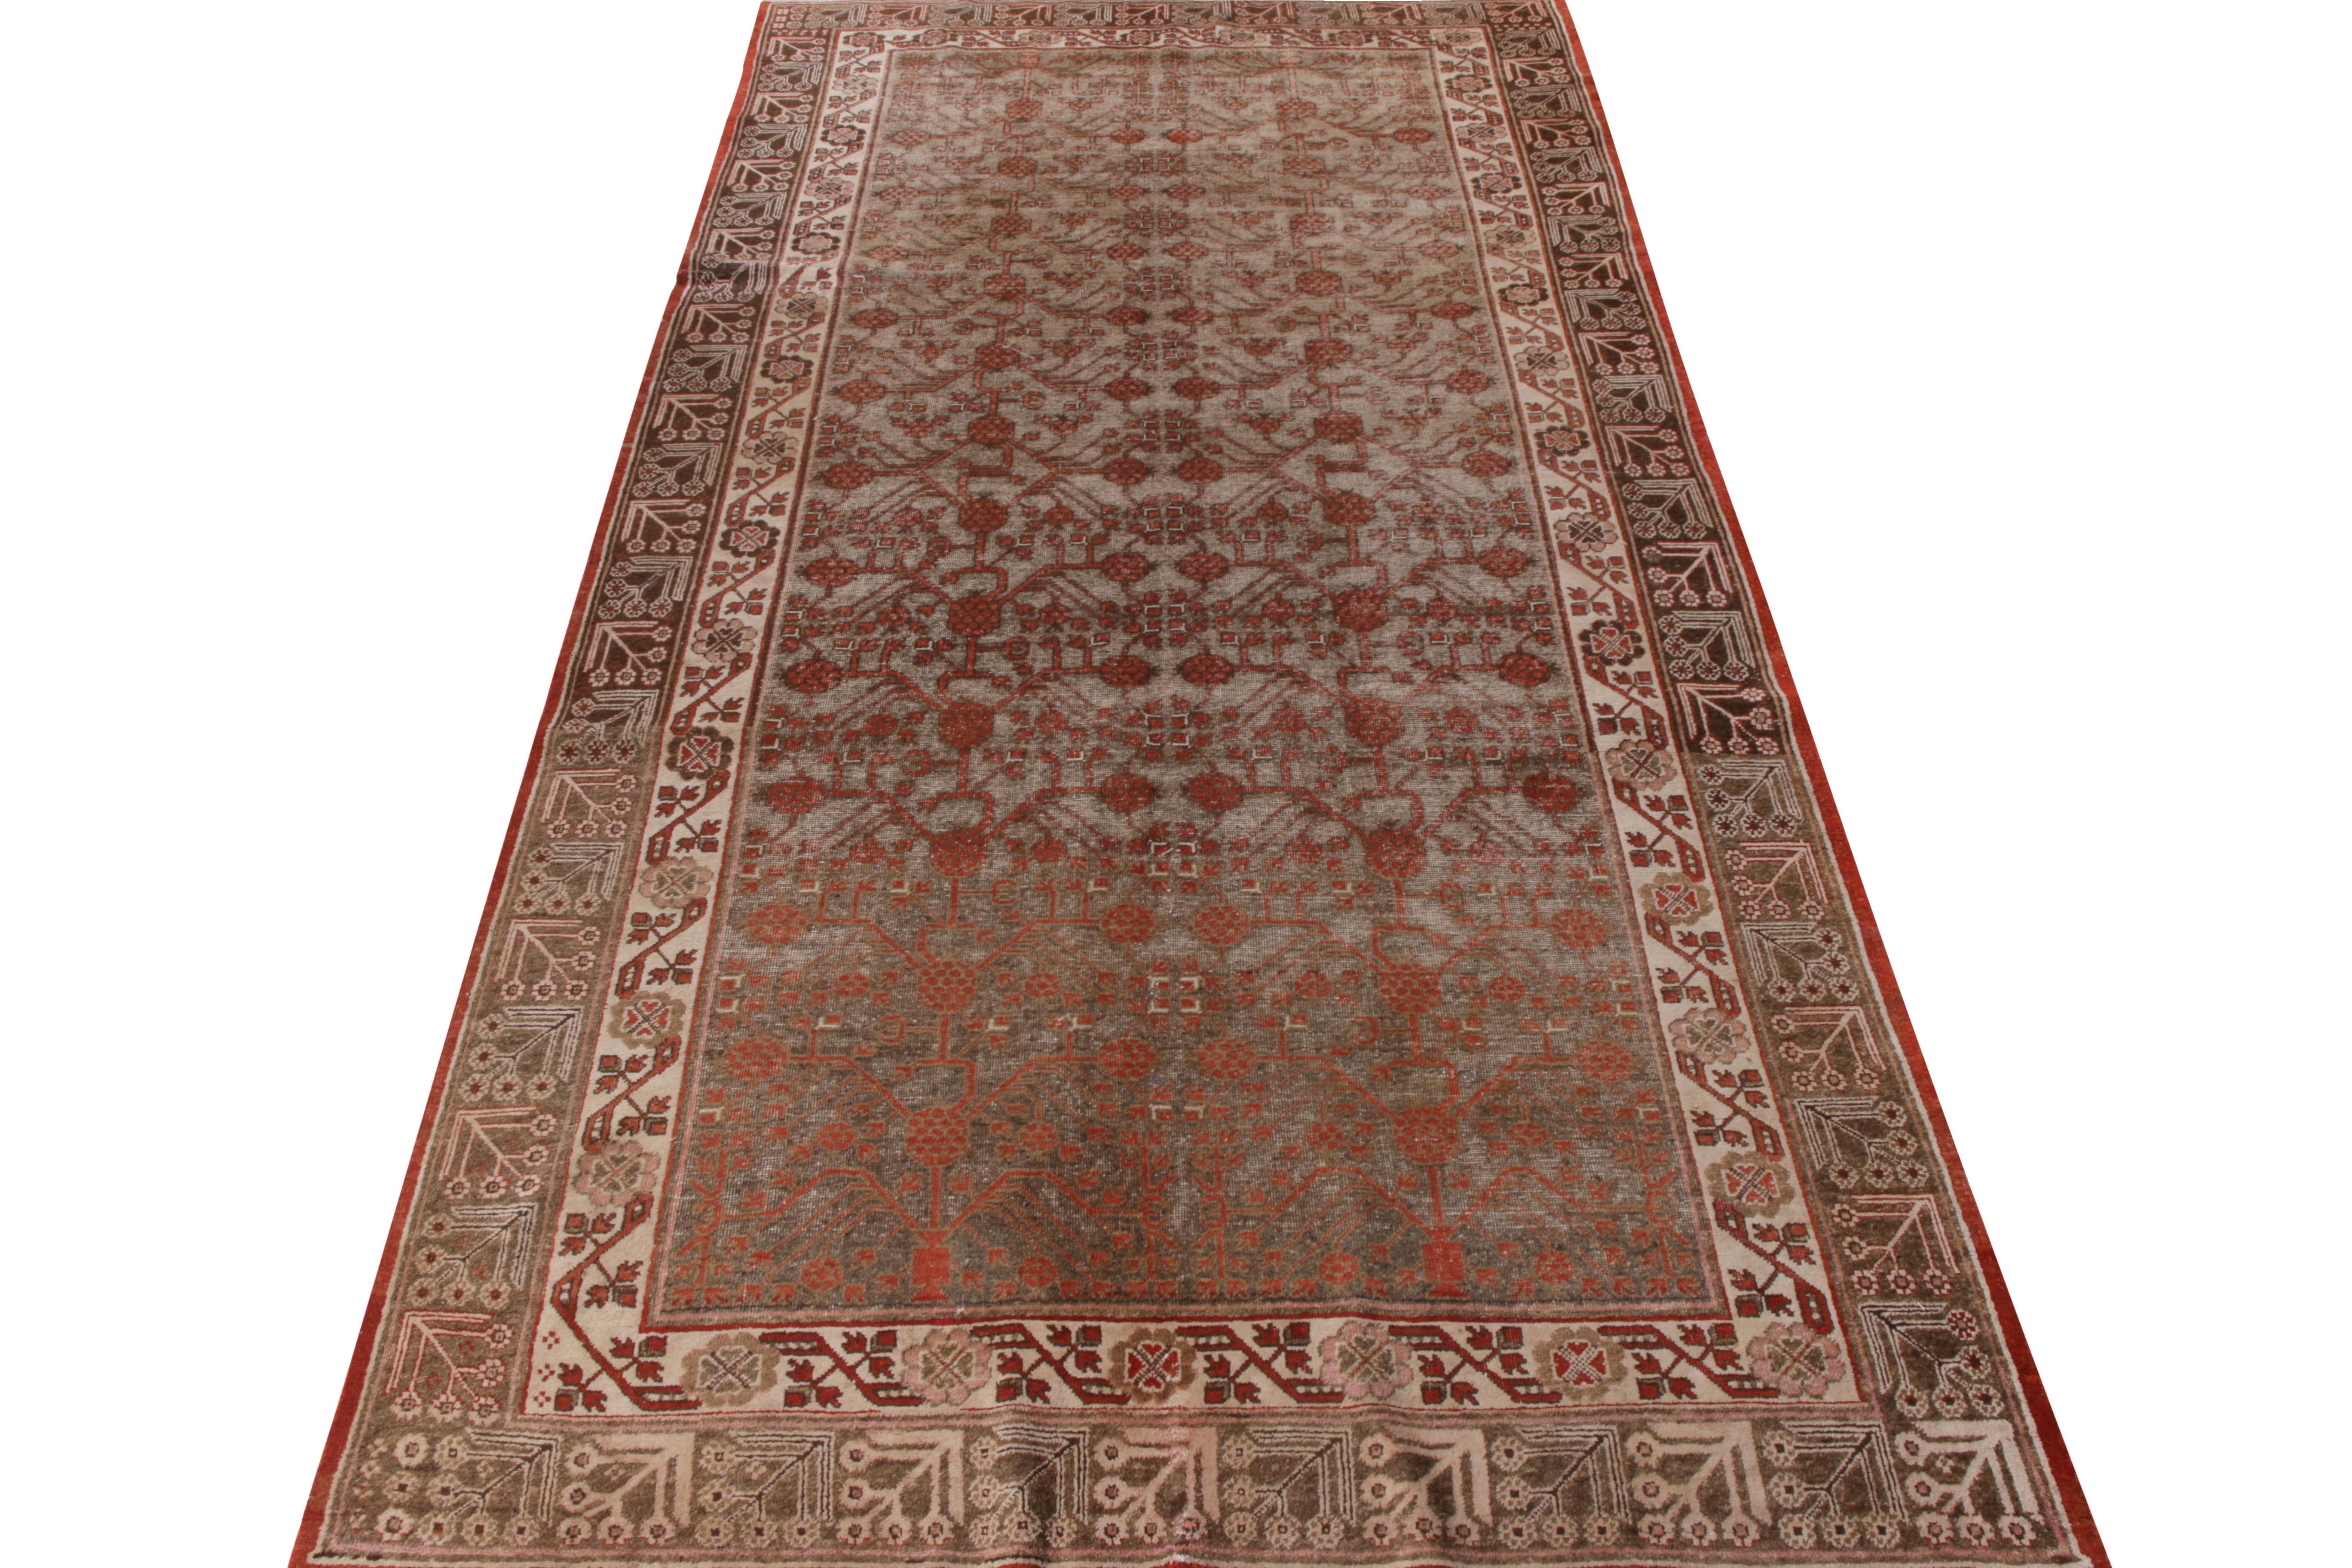 Hand knotted in quality wool, this antique 6x12 Khotan rug originates from East Turkestan circa 1920-1930. Bearing the fine design sensibilities of the early 20th century, the runner features a gorgeous geometric pattern displaying an unprecedented